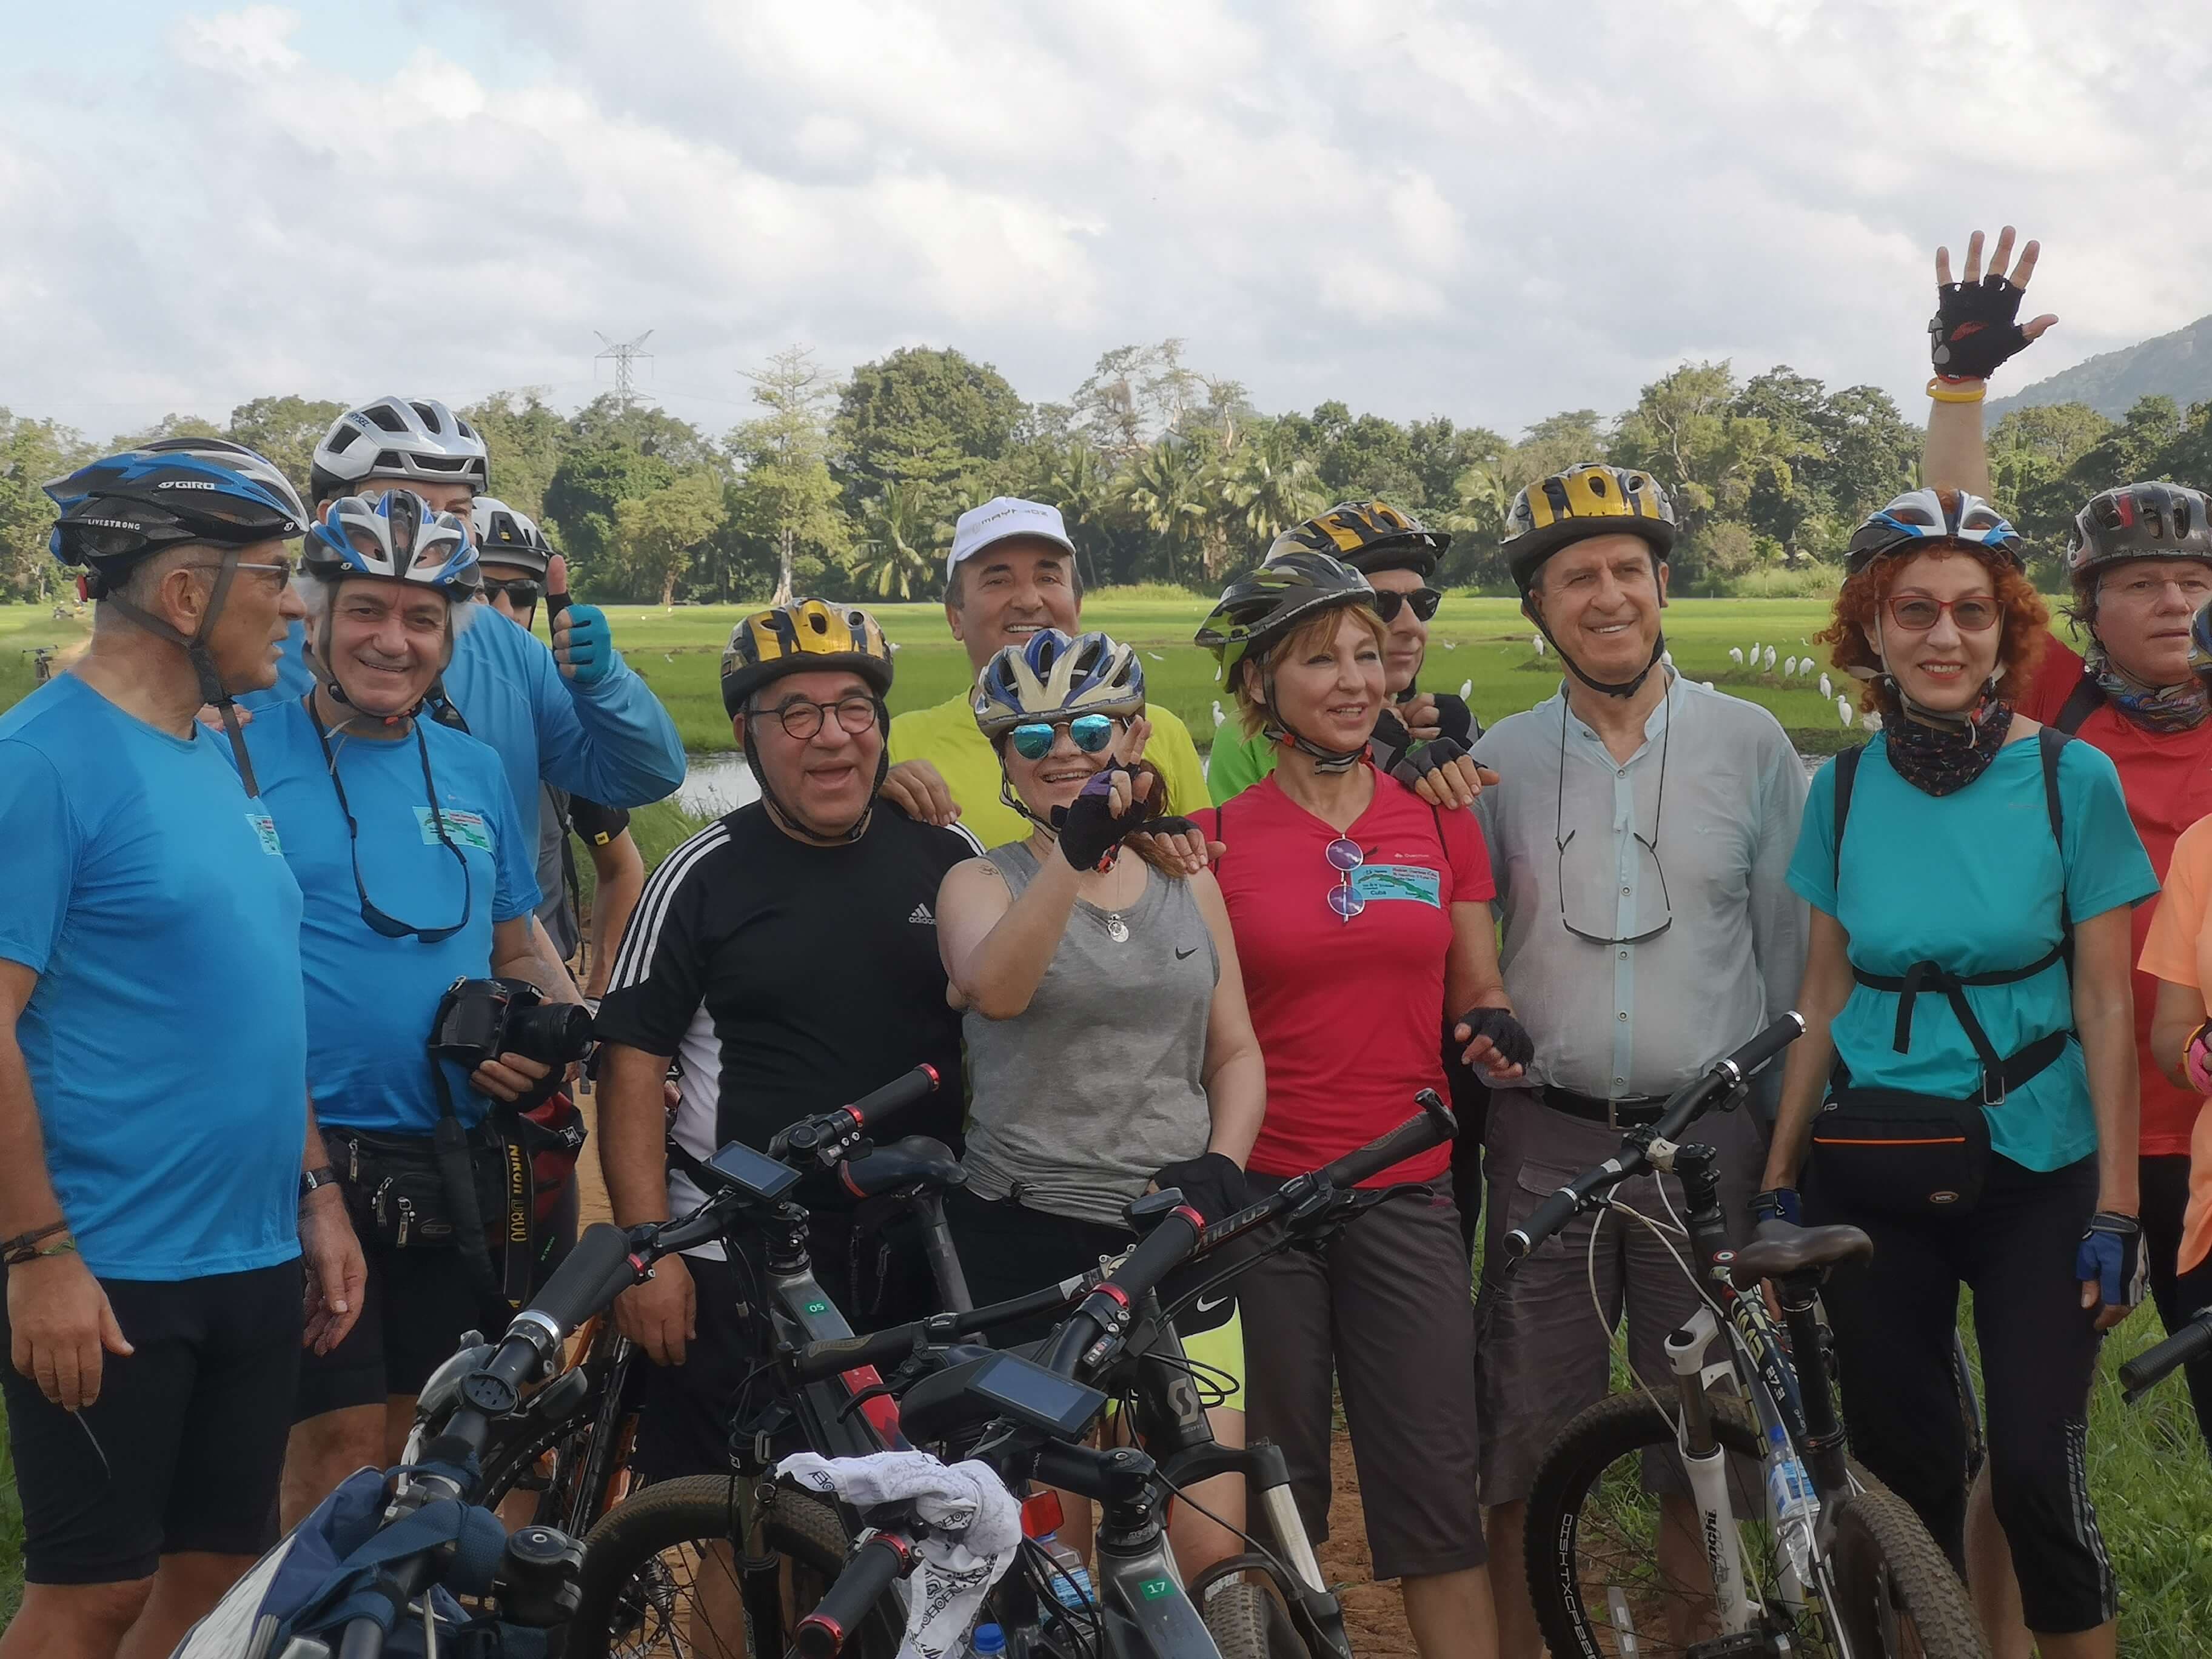 A group photo of tourists during the Colombo countryside cycle tour, Sri Lanka.